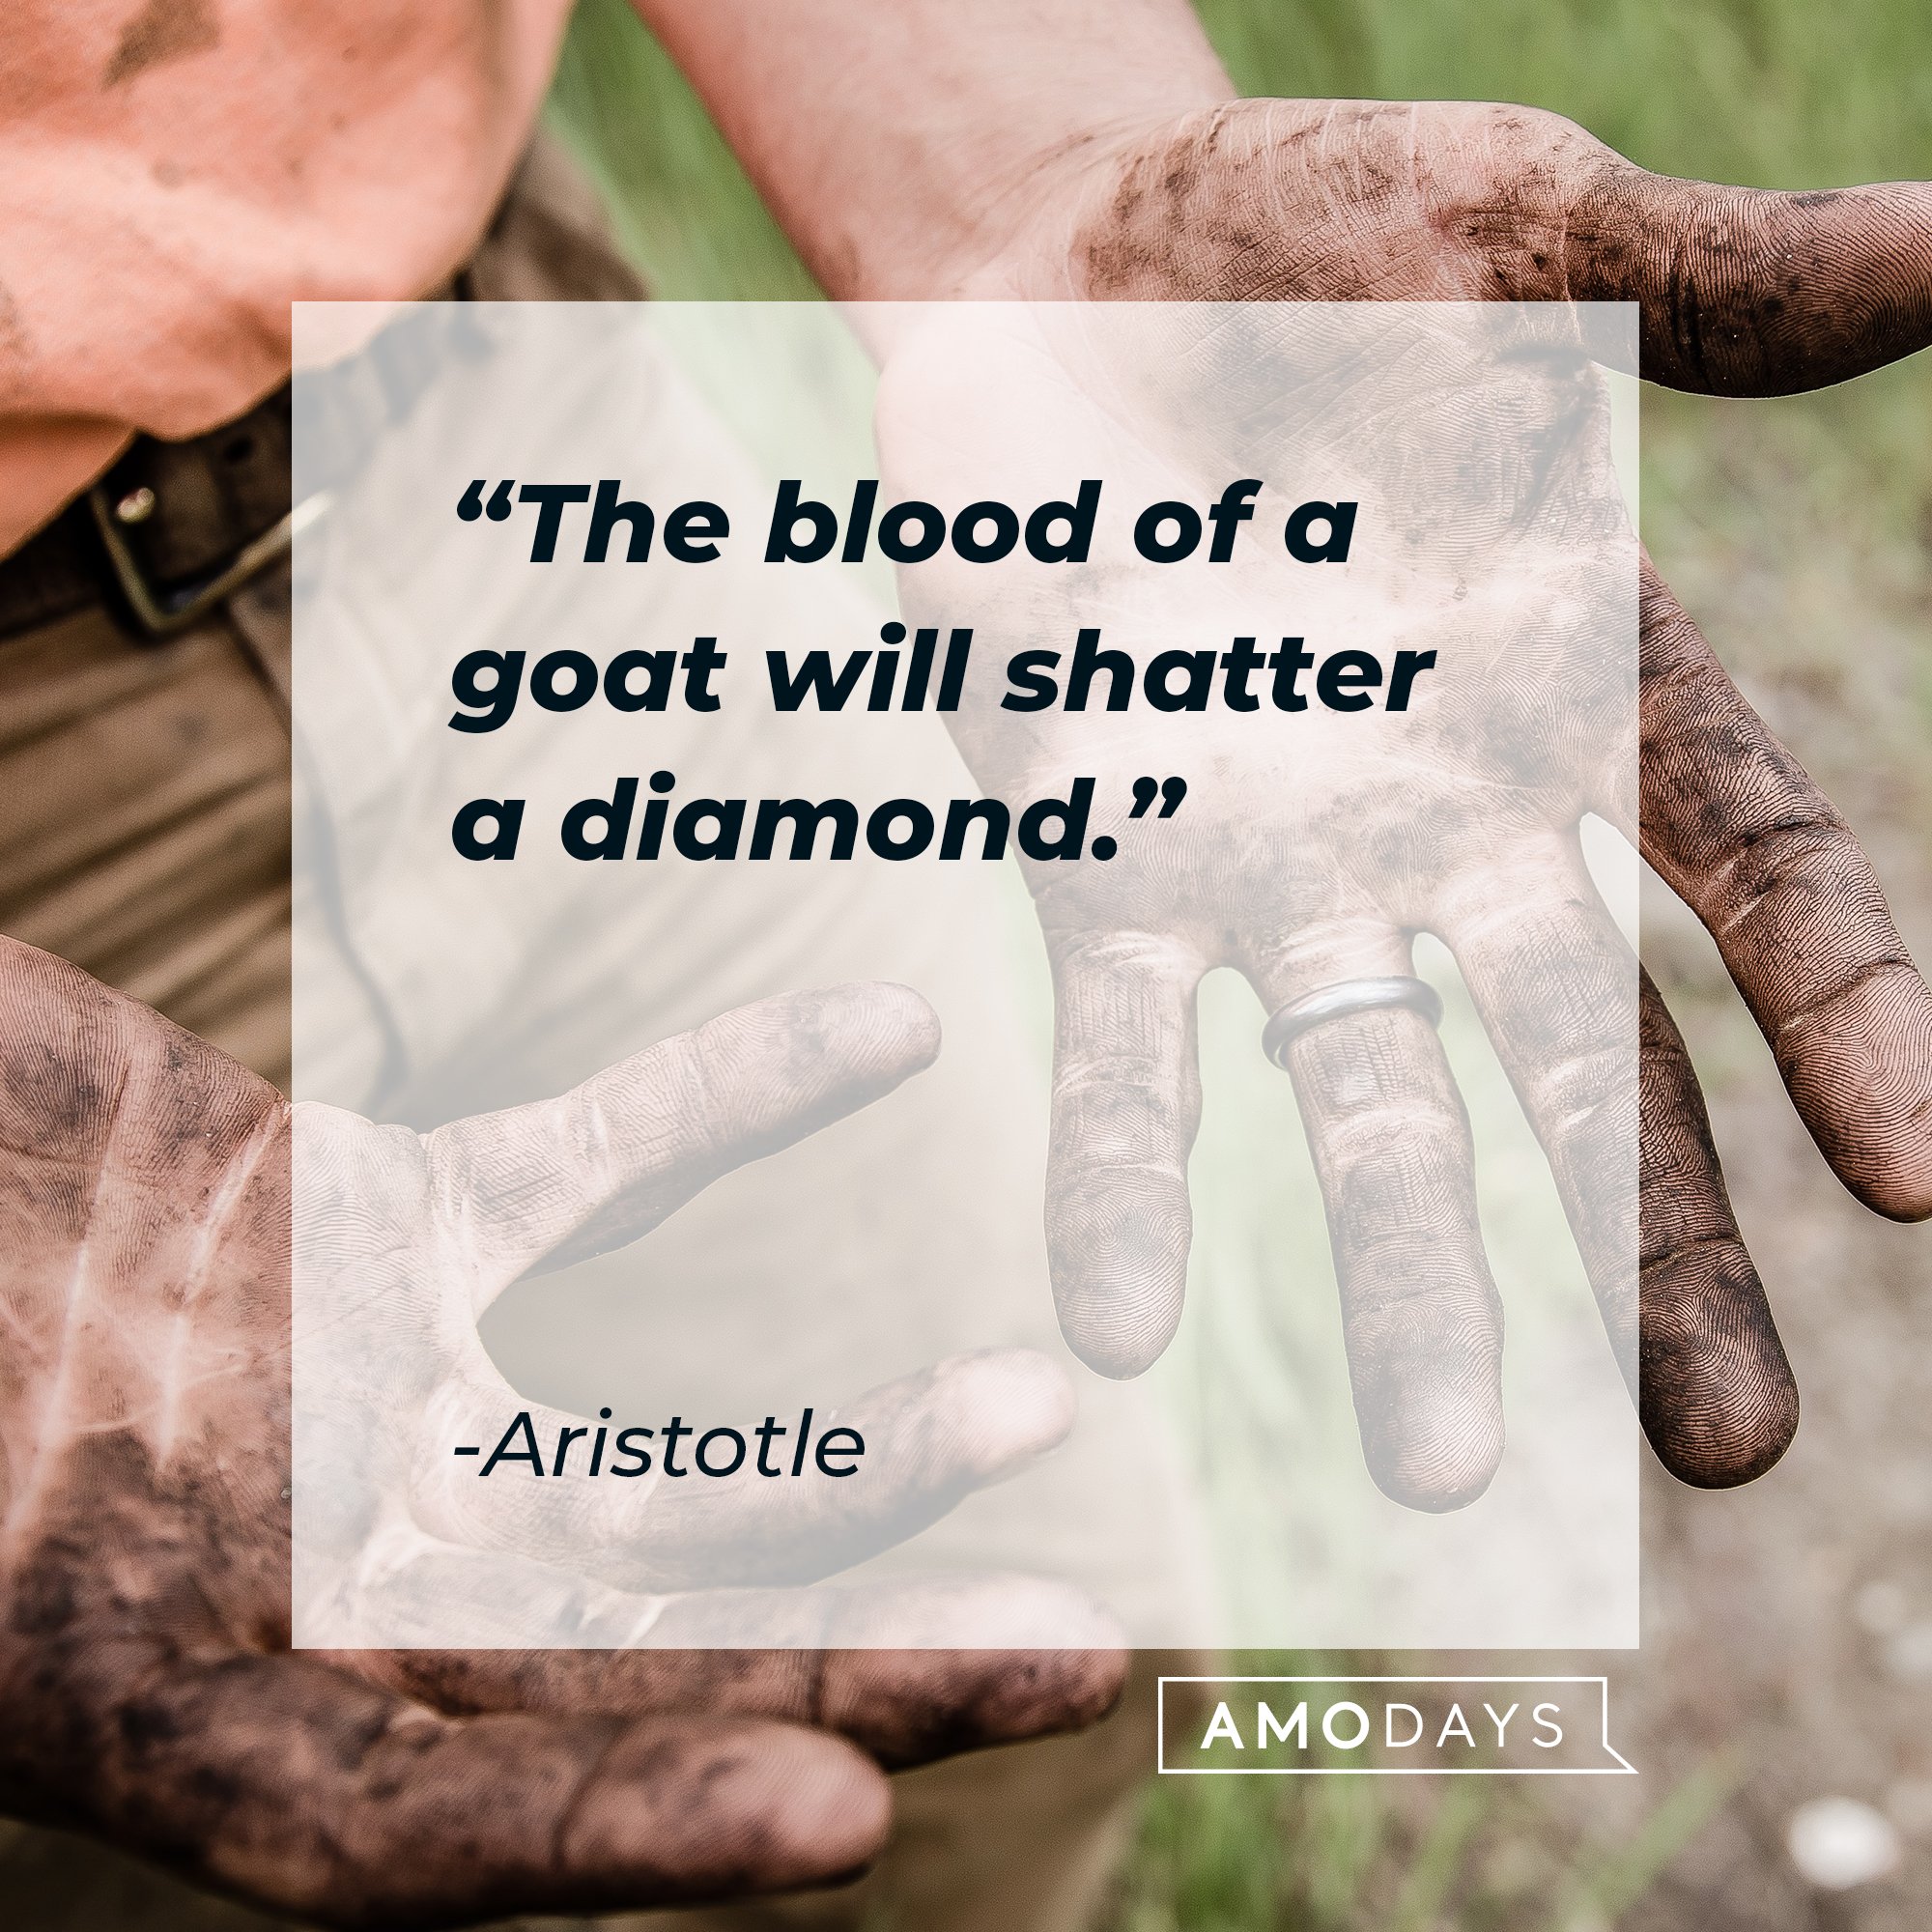 Aristotle’s quote: "The blood of a goat will shatter a diamond." | Image: AmoDays 